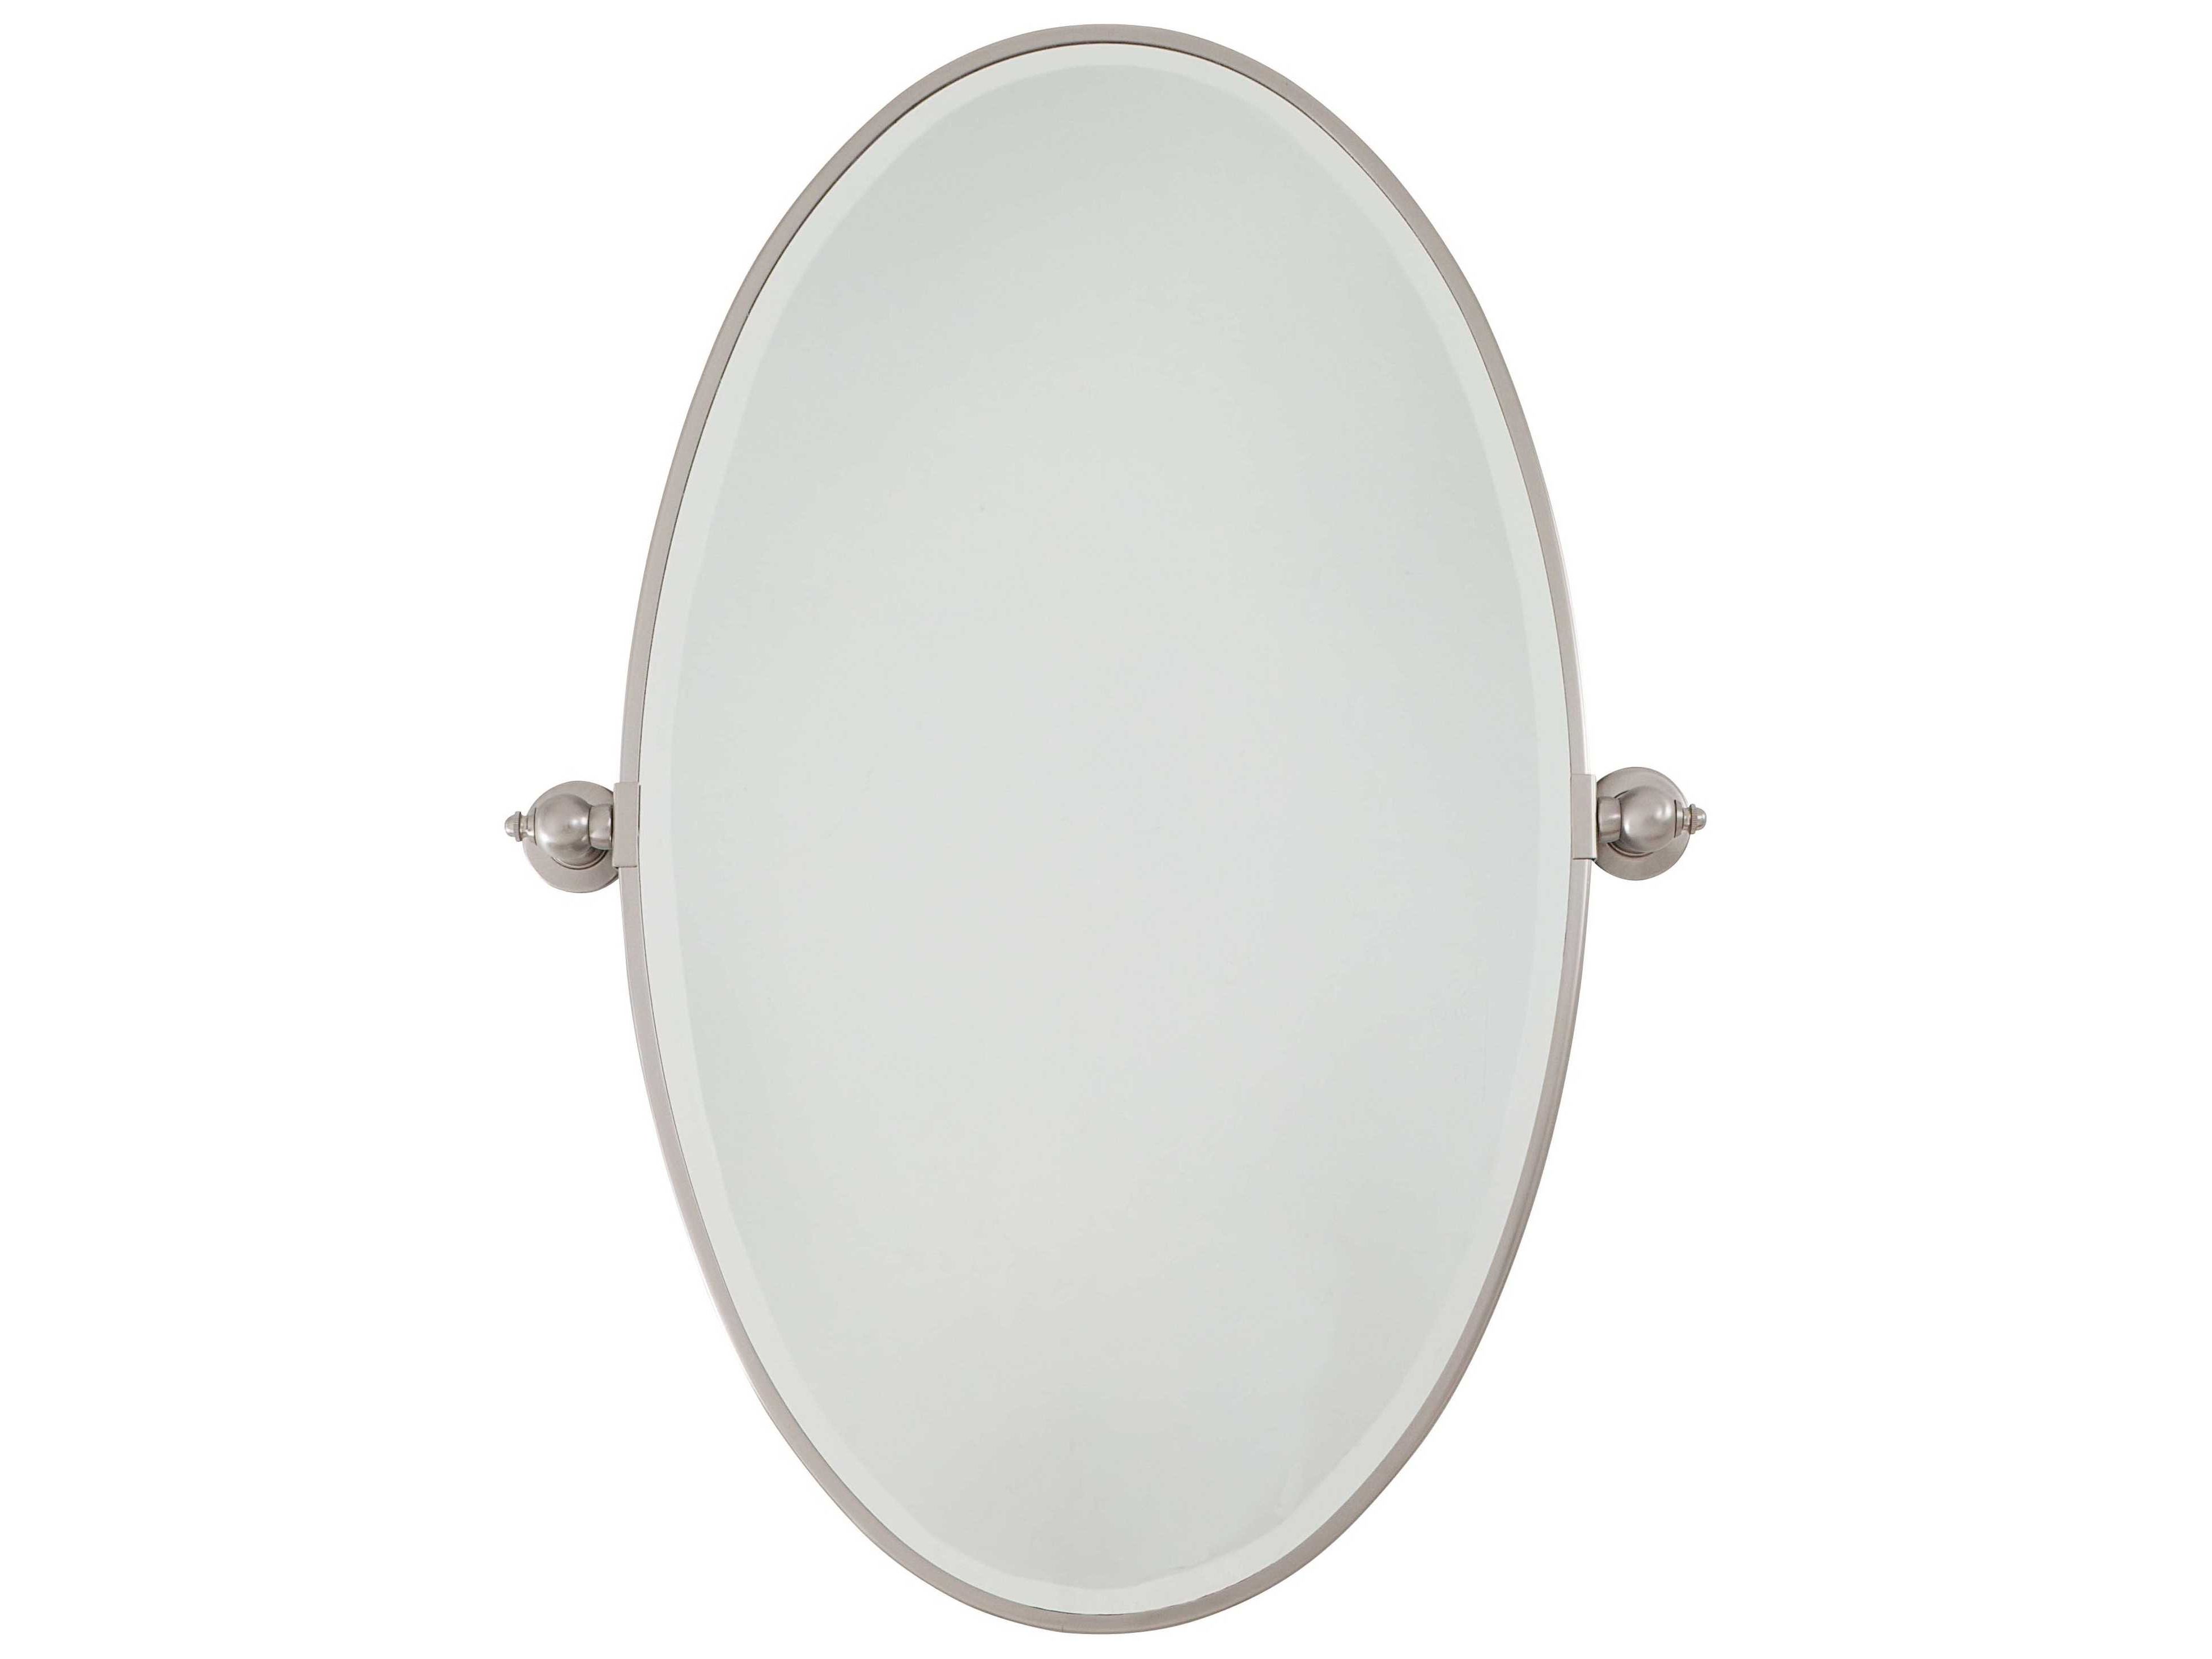 Famous Pivoting Wall Mirror Within Minka Lavery Pivoting Brushed Nickel Wall Mirror (View 18 of 20)